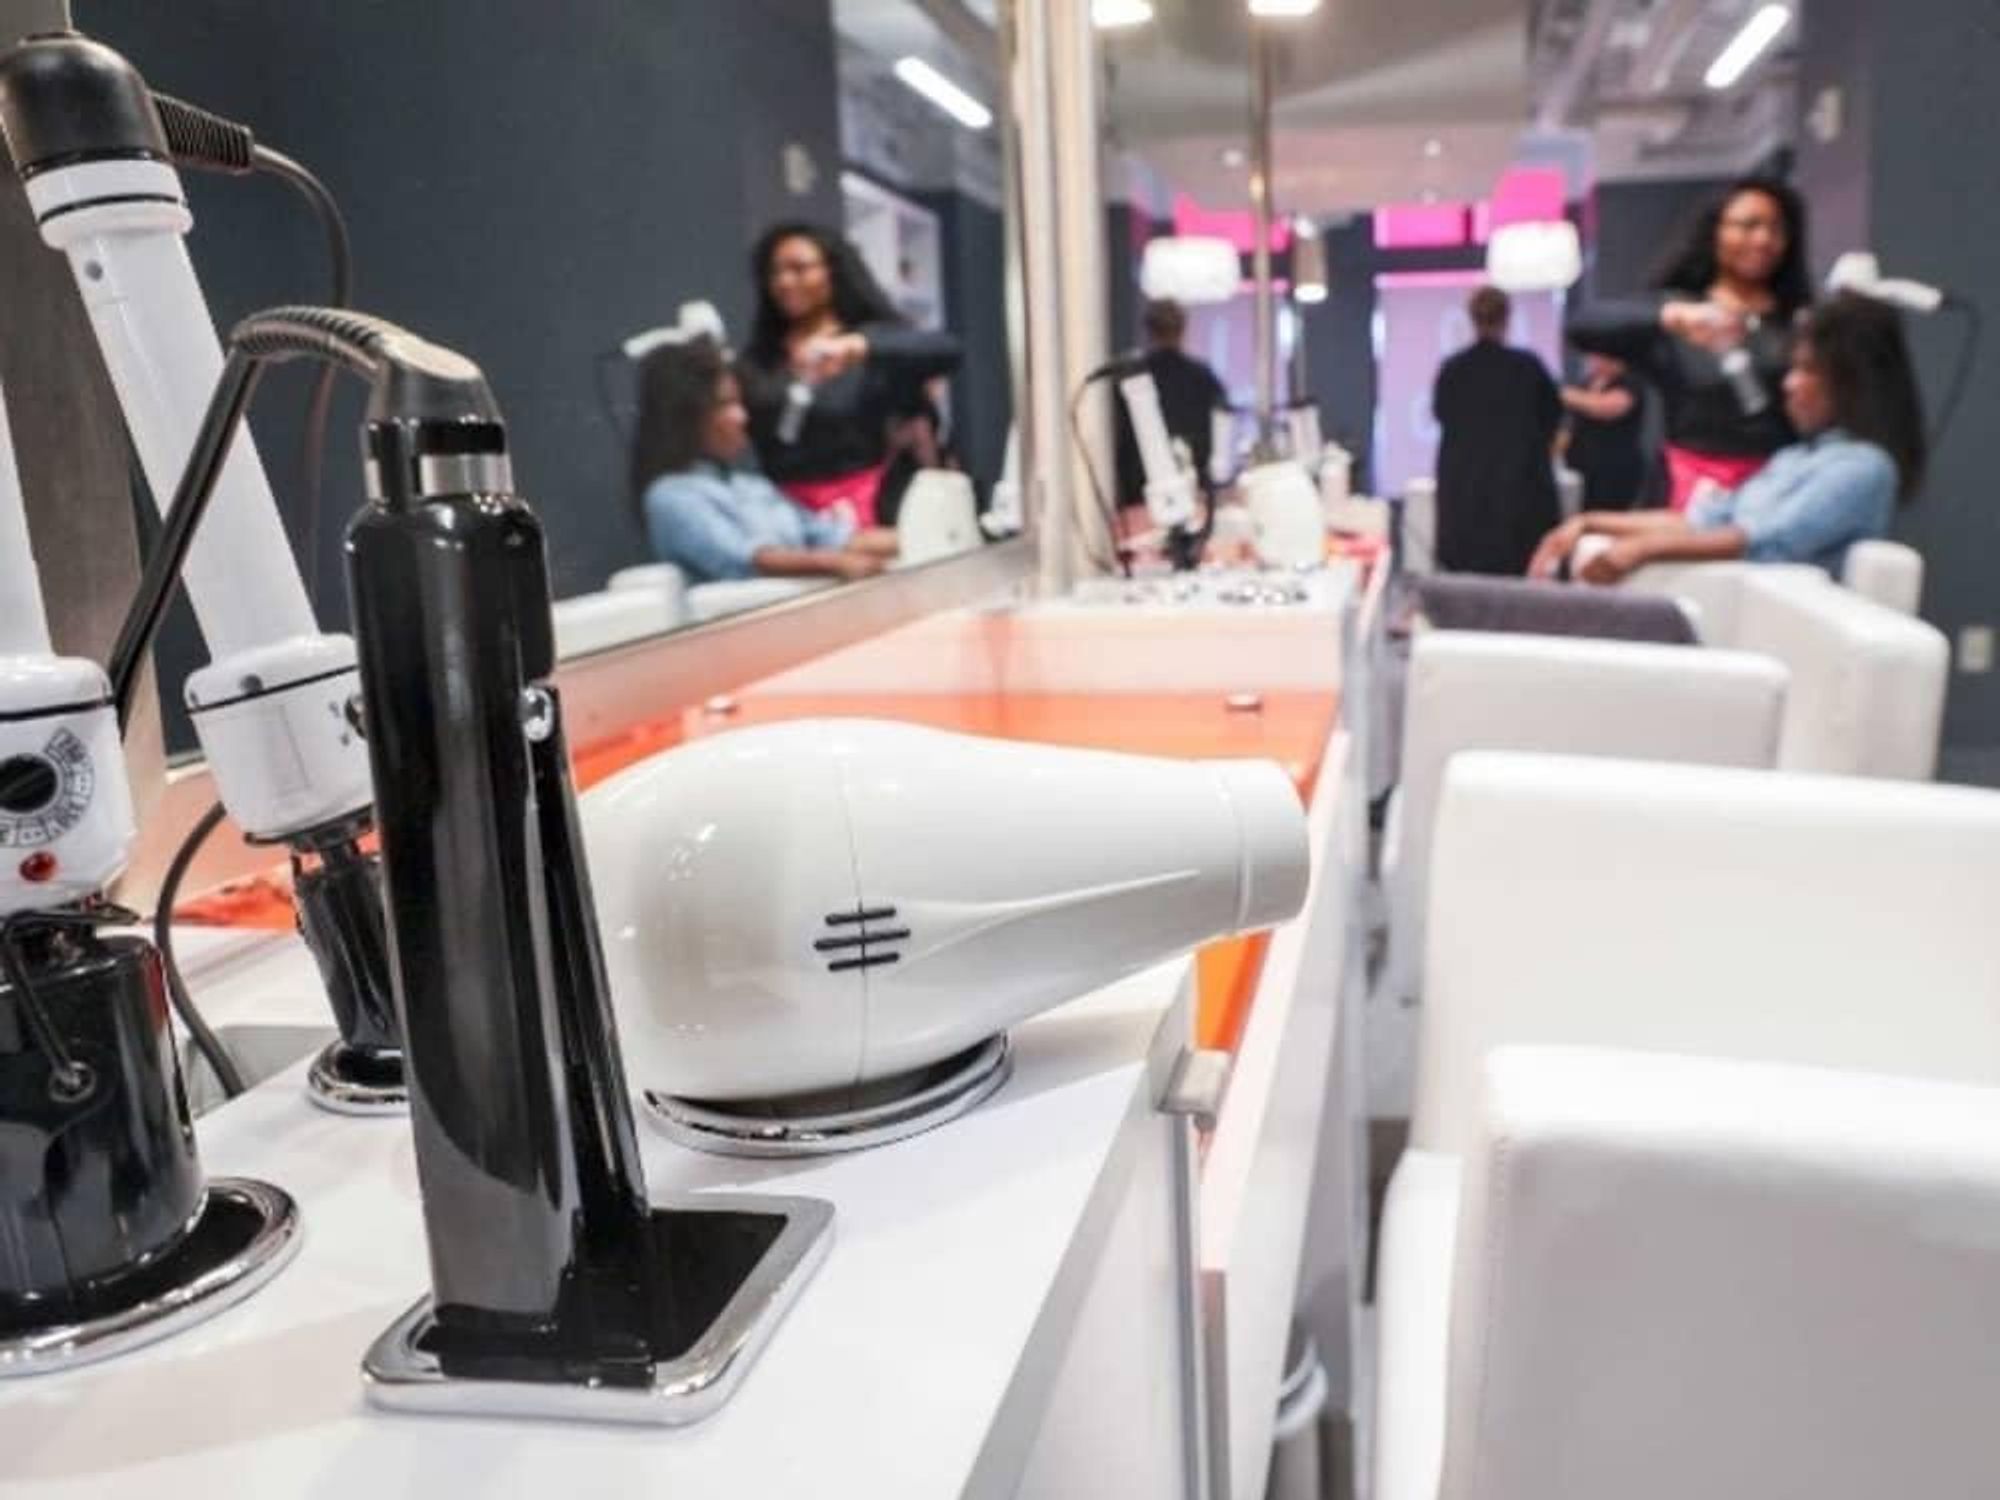 New blow dry bar is more than a tease for Southlake's best tressed -  CultureMap Fort Worth